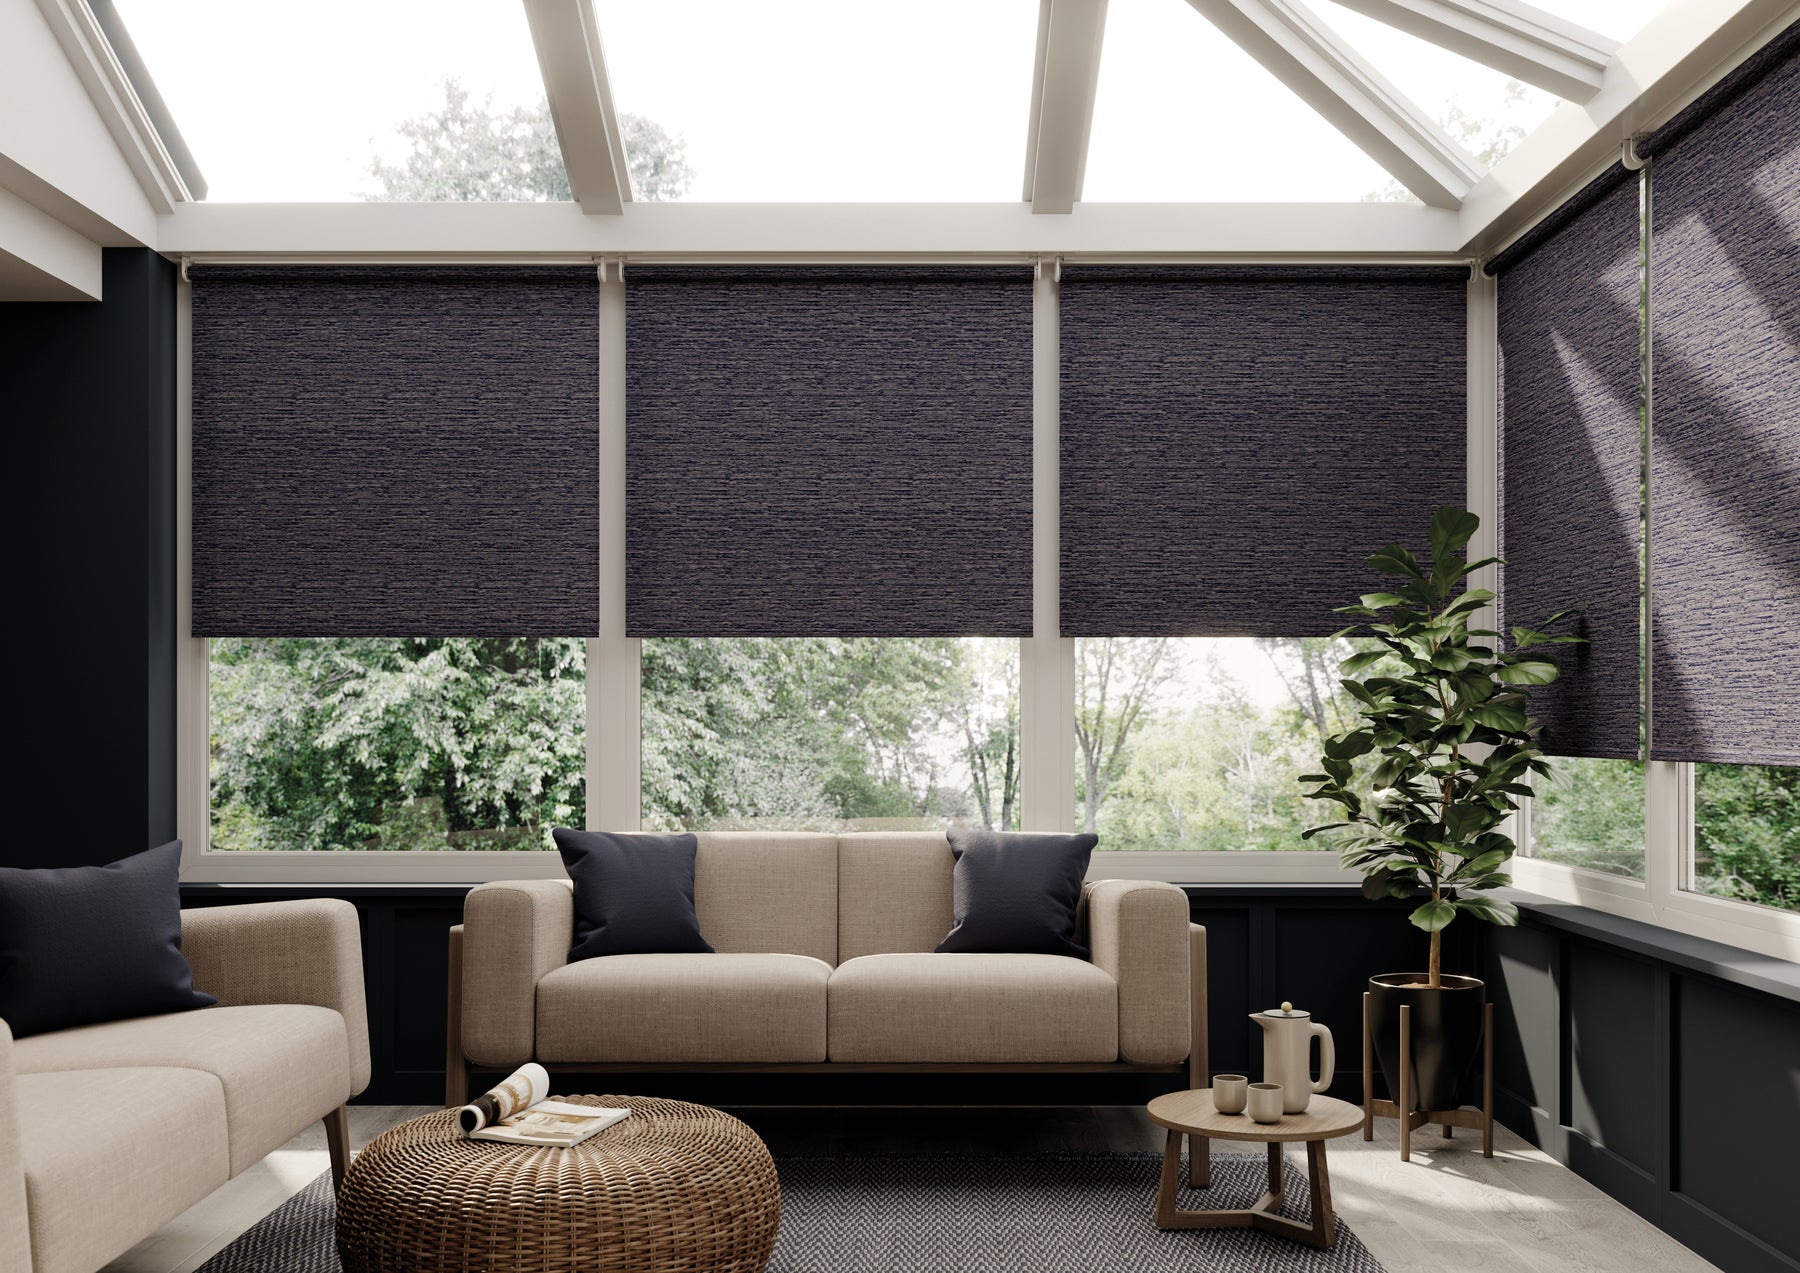 How to Fix Roller Blinds: Tips & Step-by-Step Guide